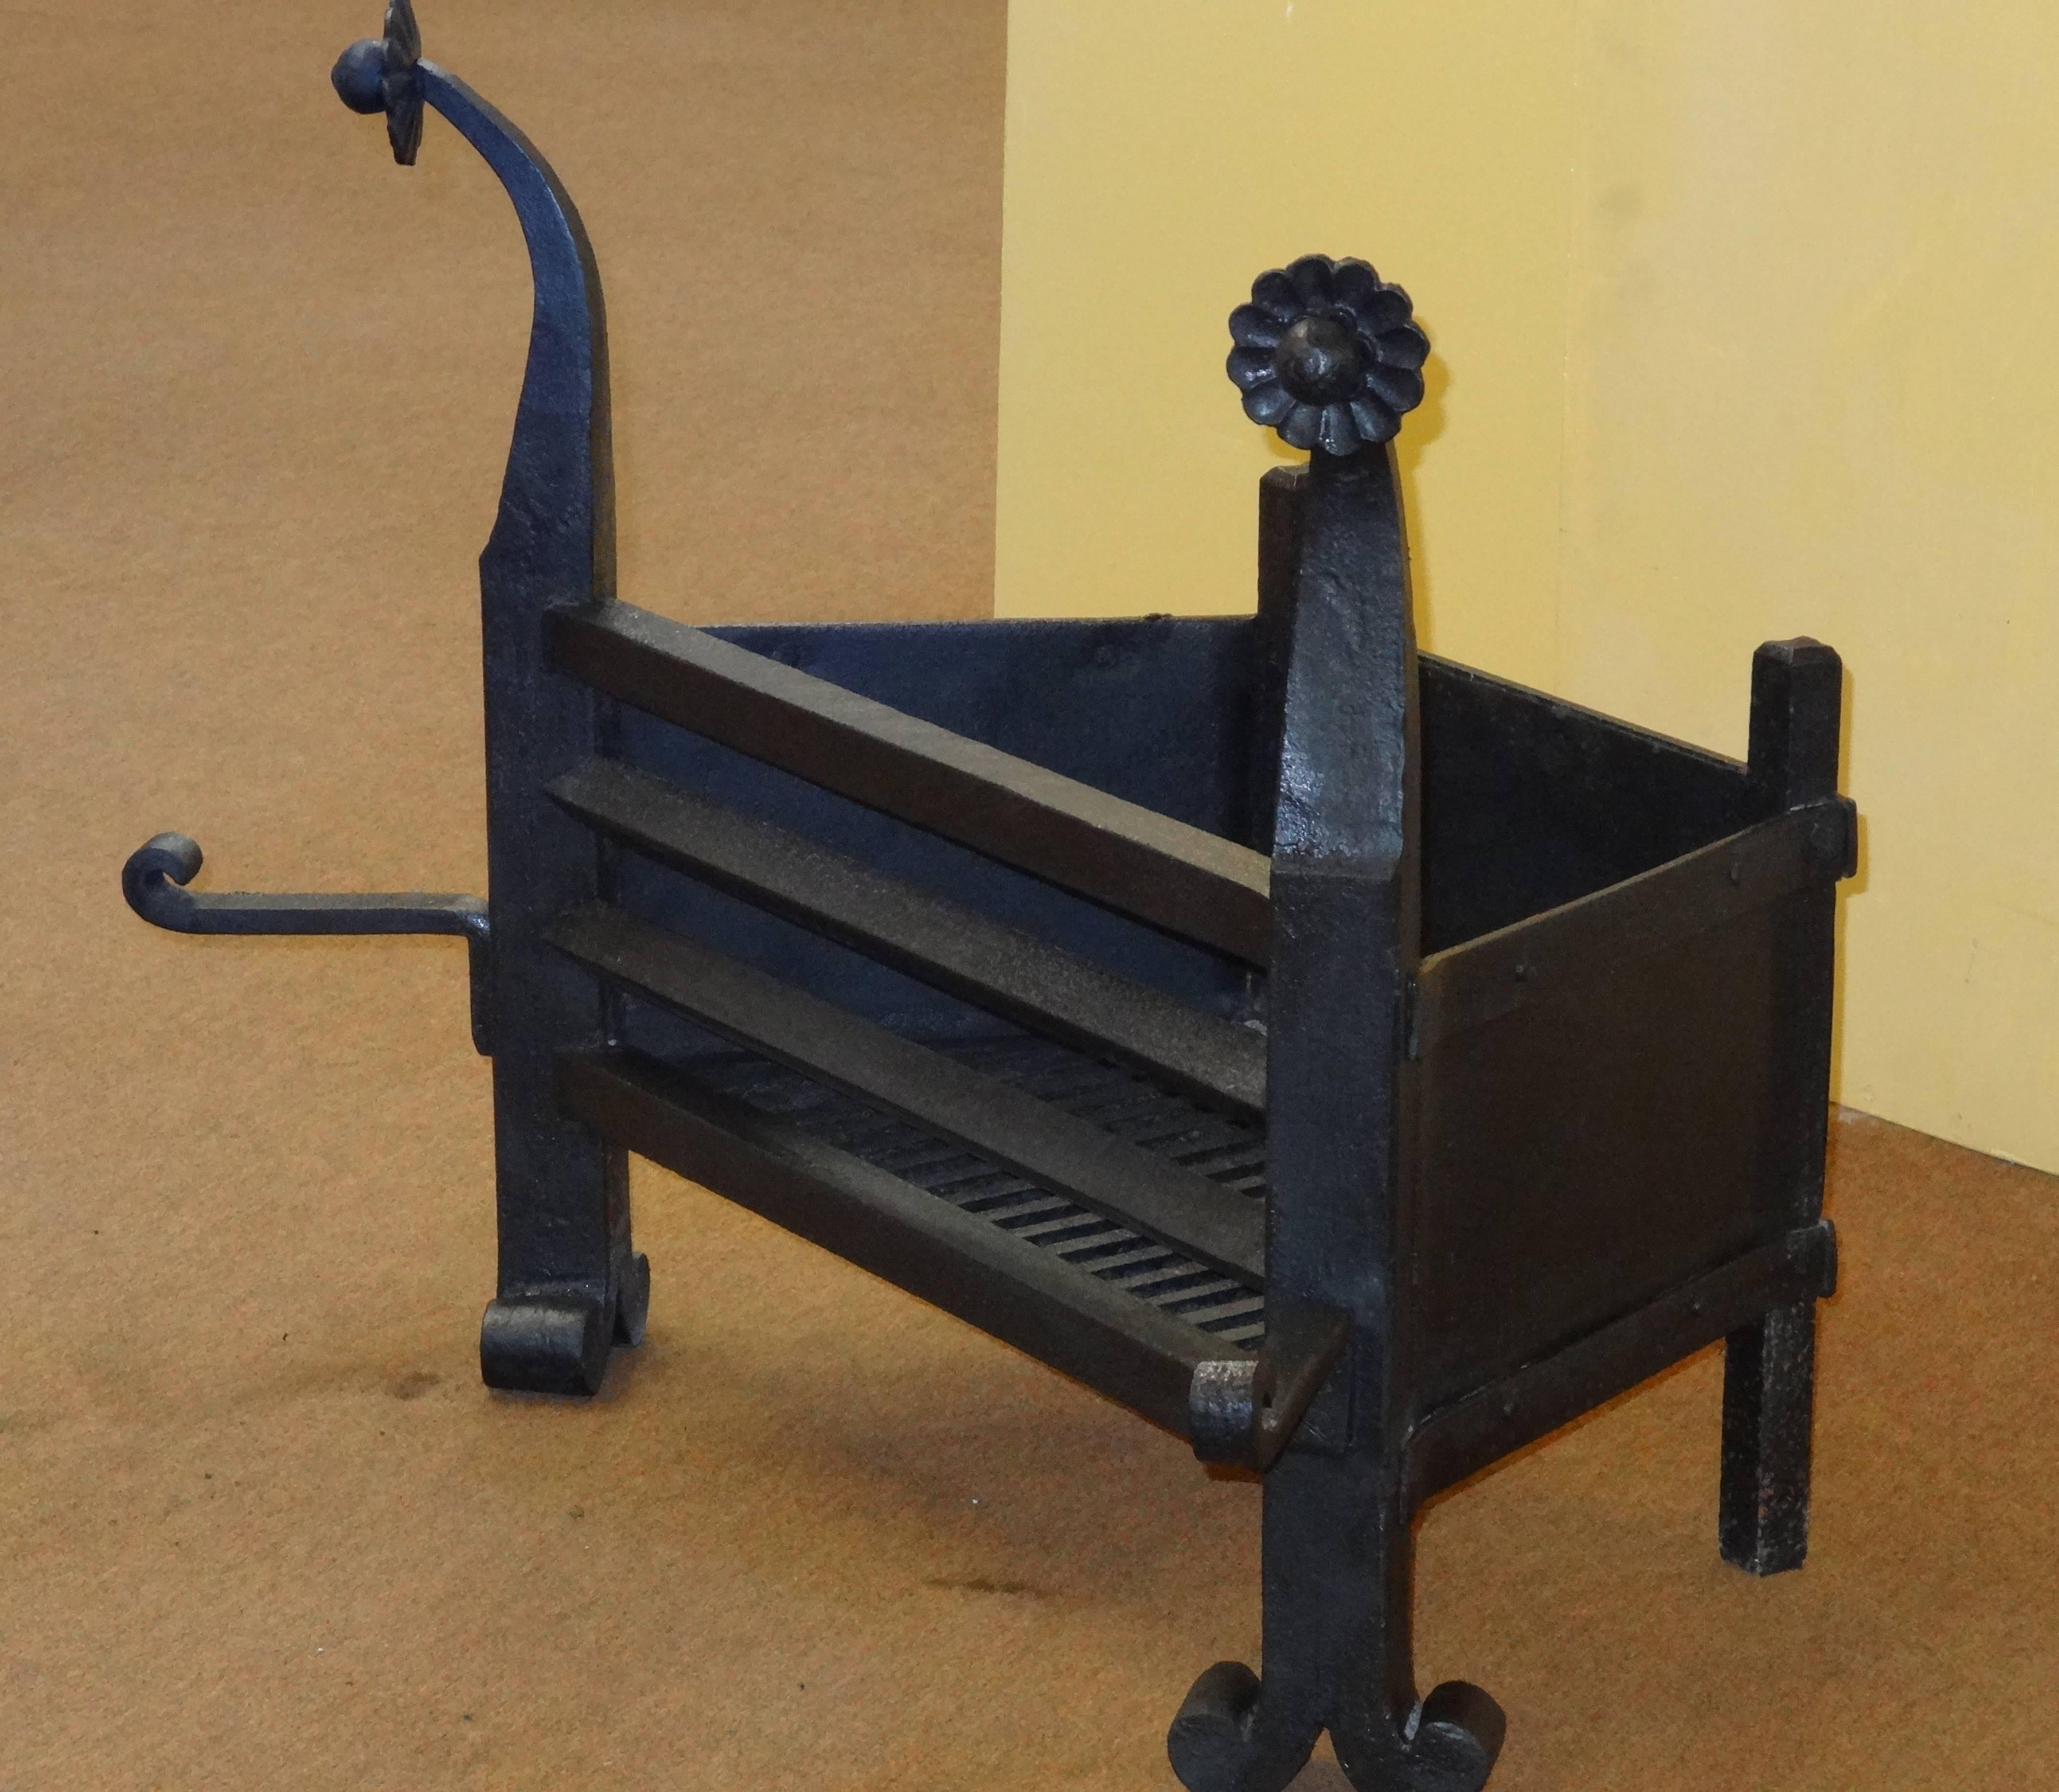 Rare reclaimed antique 19th century Arts & Crafts heavy cast iron dog grate fire basket.

Reclaimed from 19th century property County Antrim Northern Ireland.